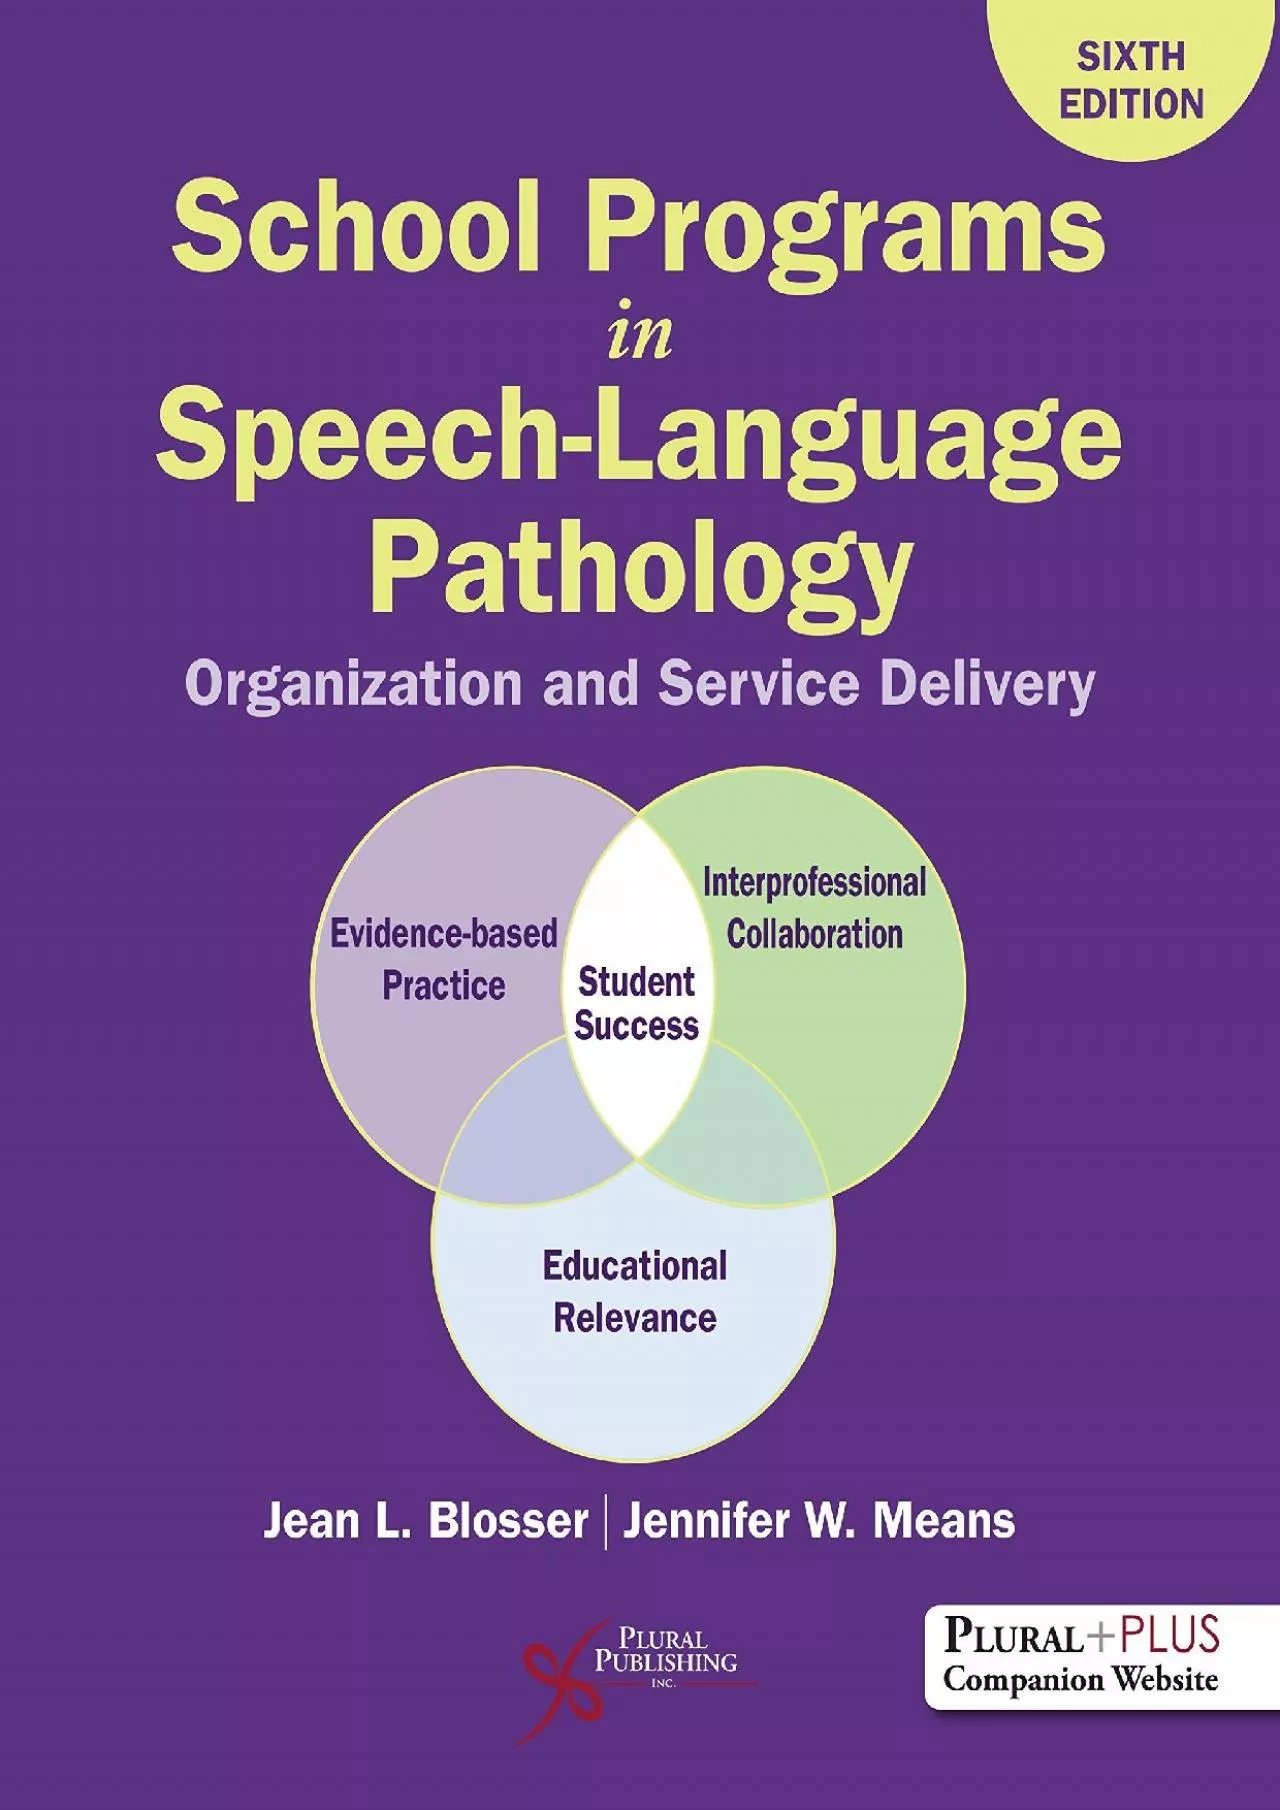 (BOOK)-School Programs in Speech-Language Pathology: Organization and Delivery, Sixth